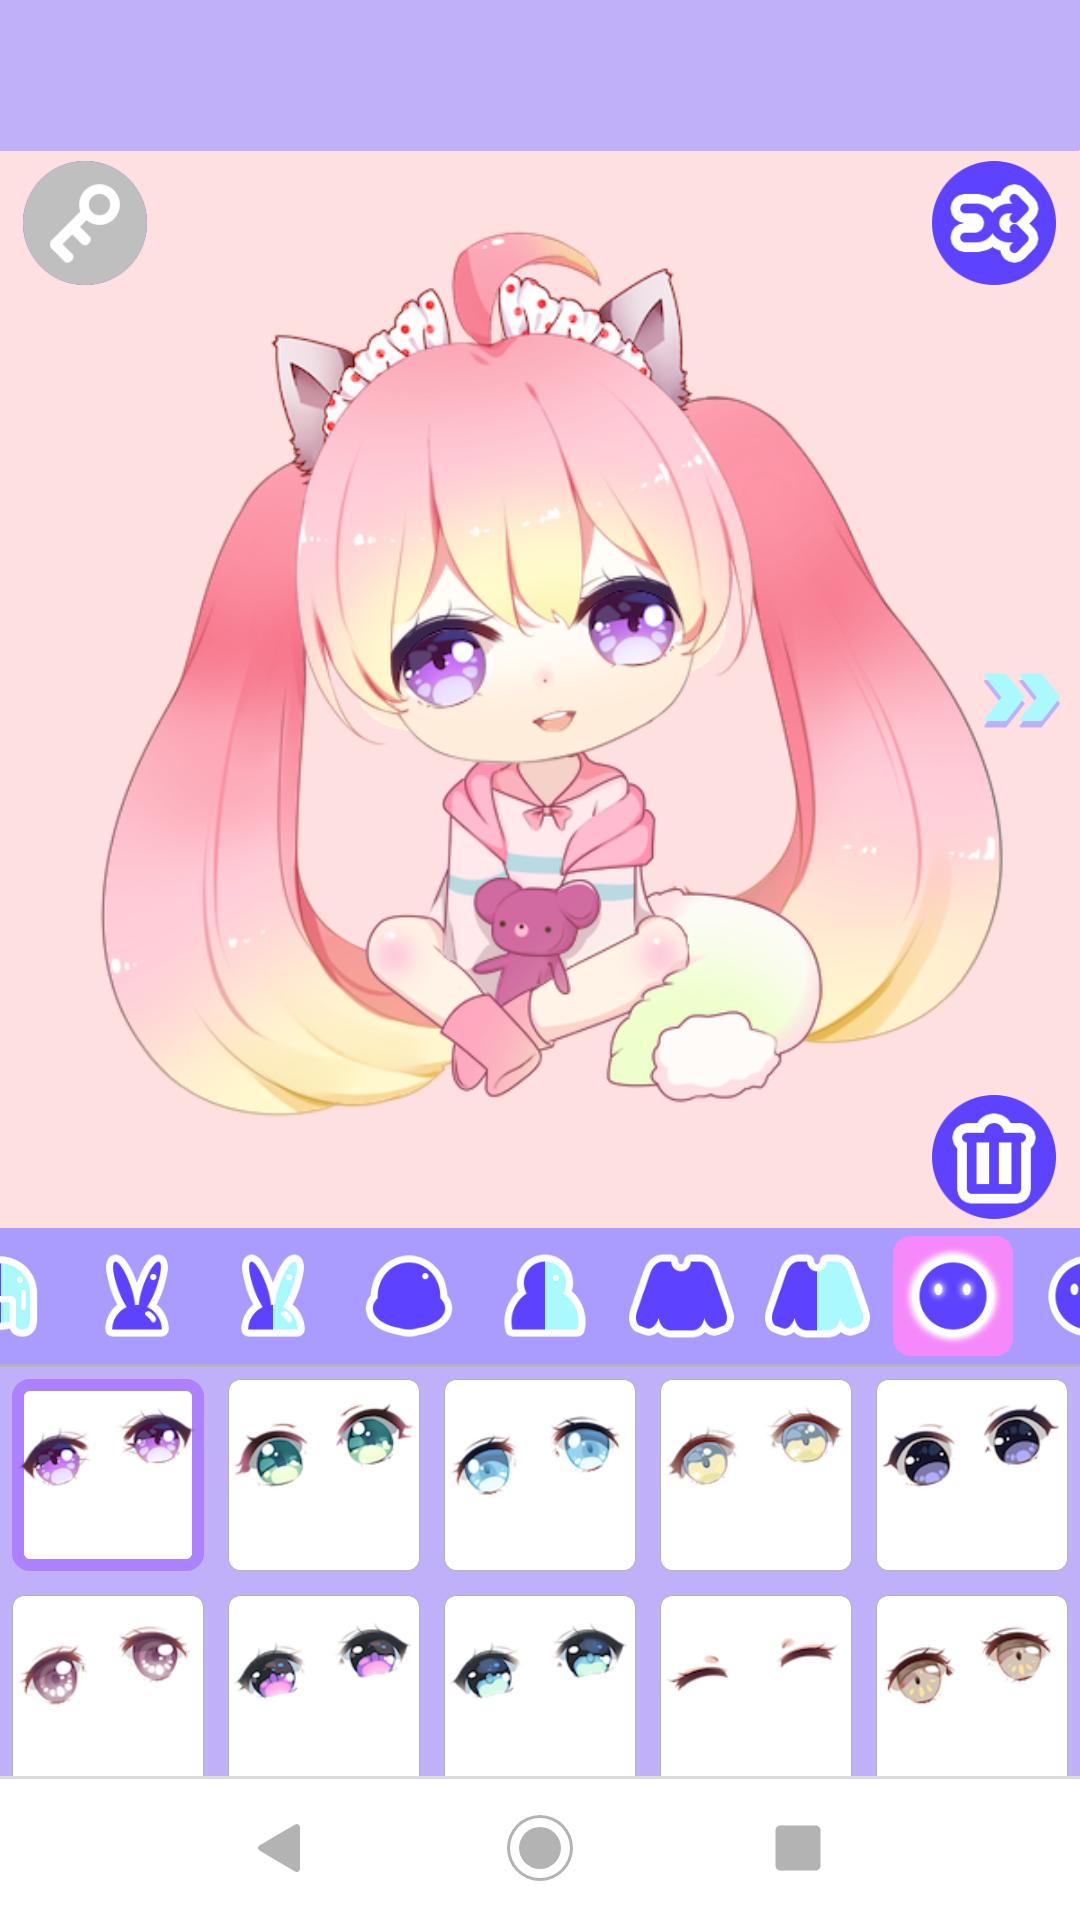 Cute Girl Avatar for Android - APK Download